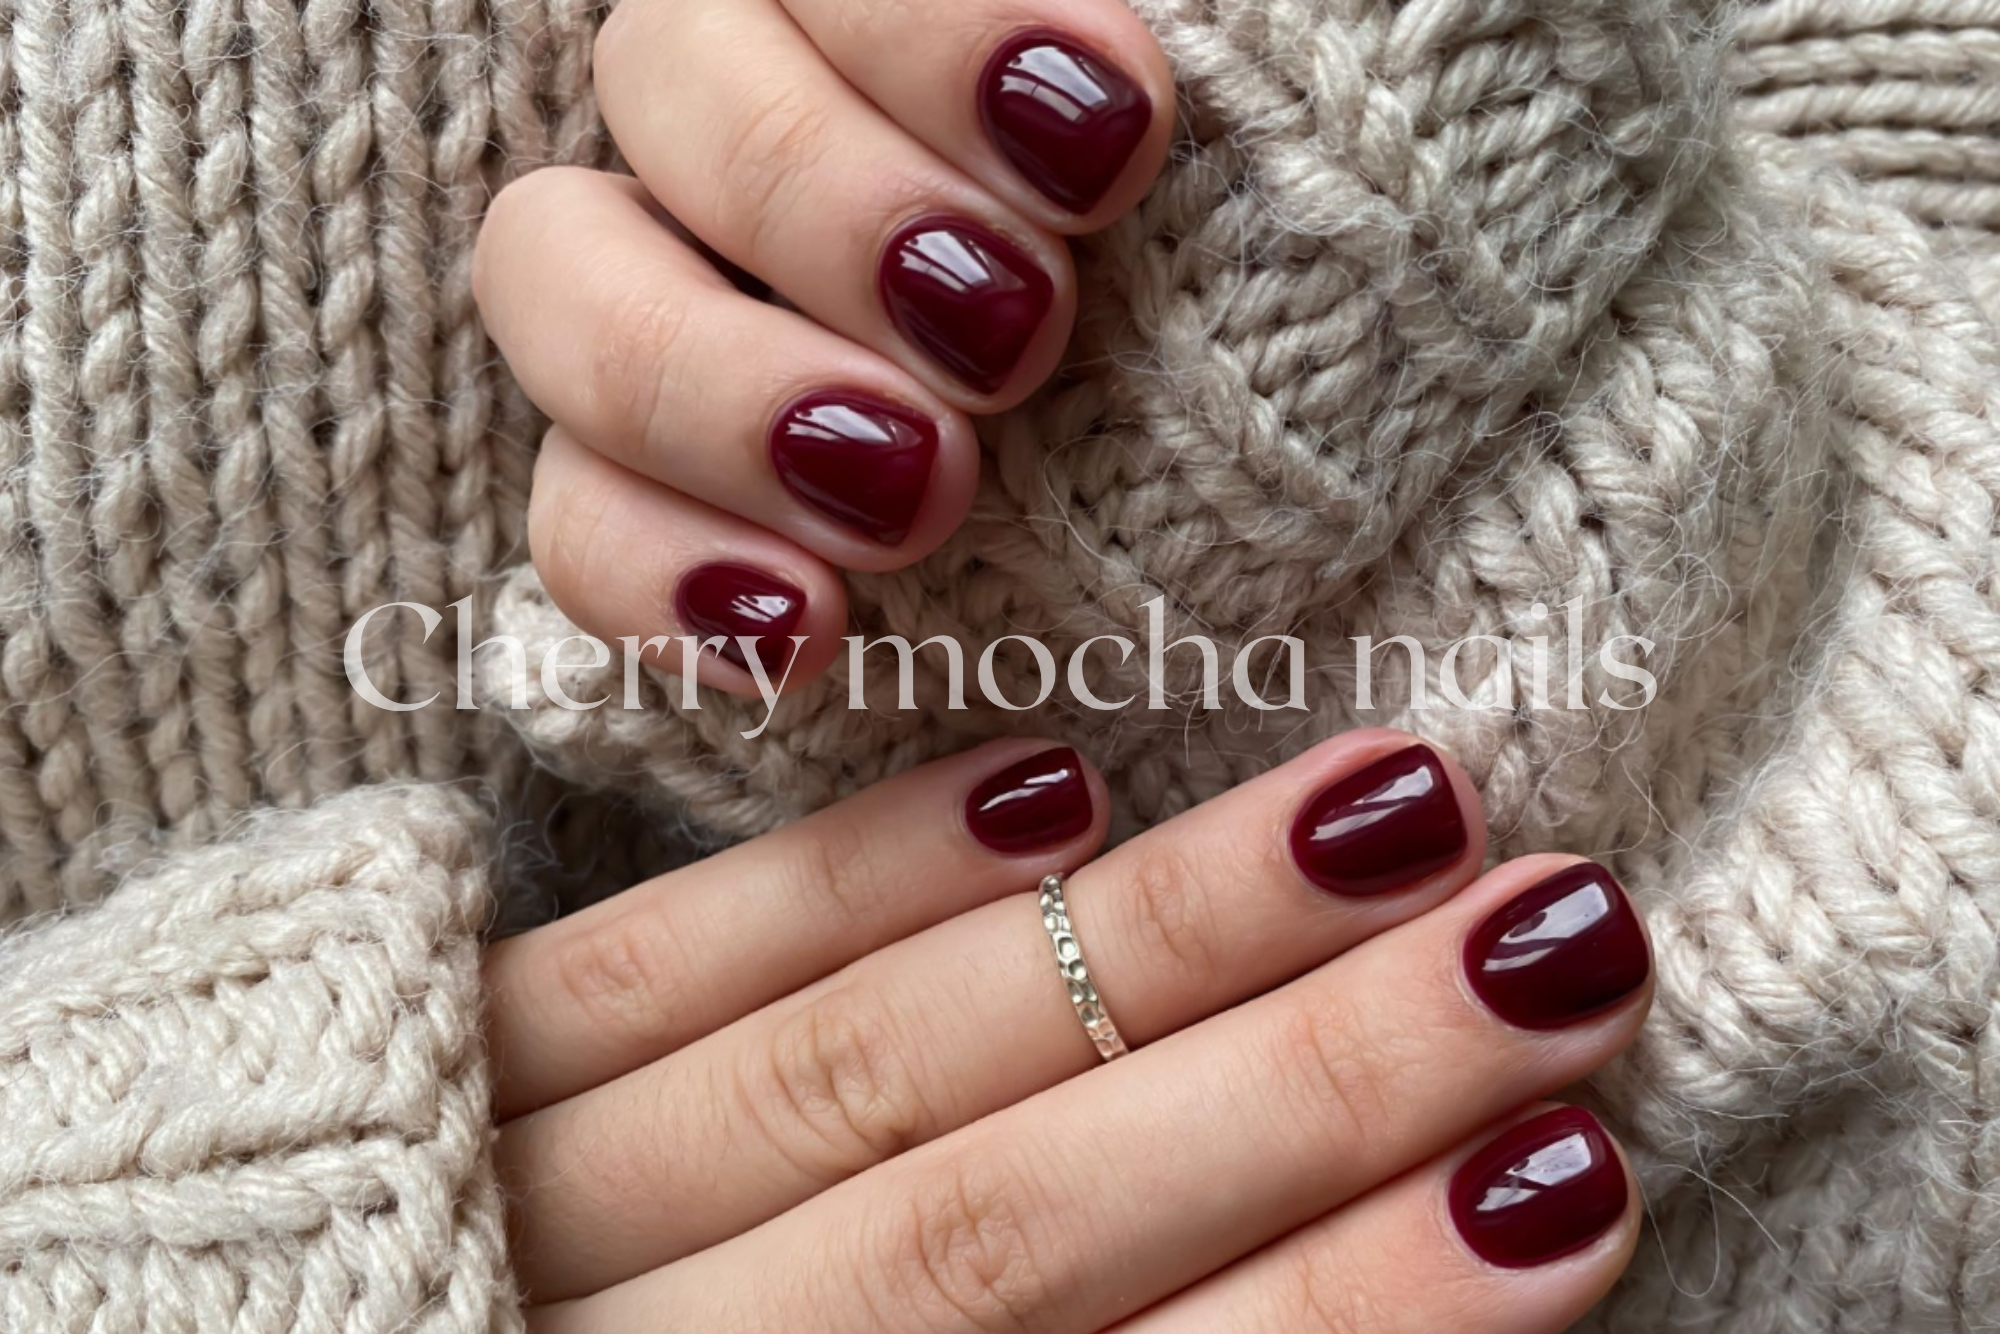 Cherry mocha nails: What all fashionistas are obsessed with